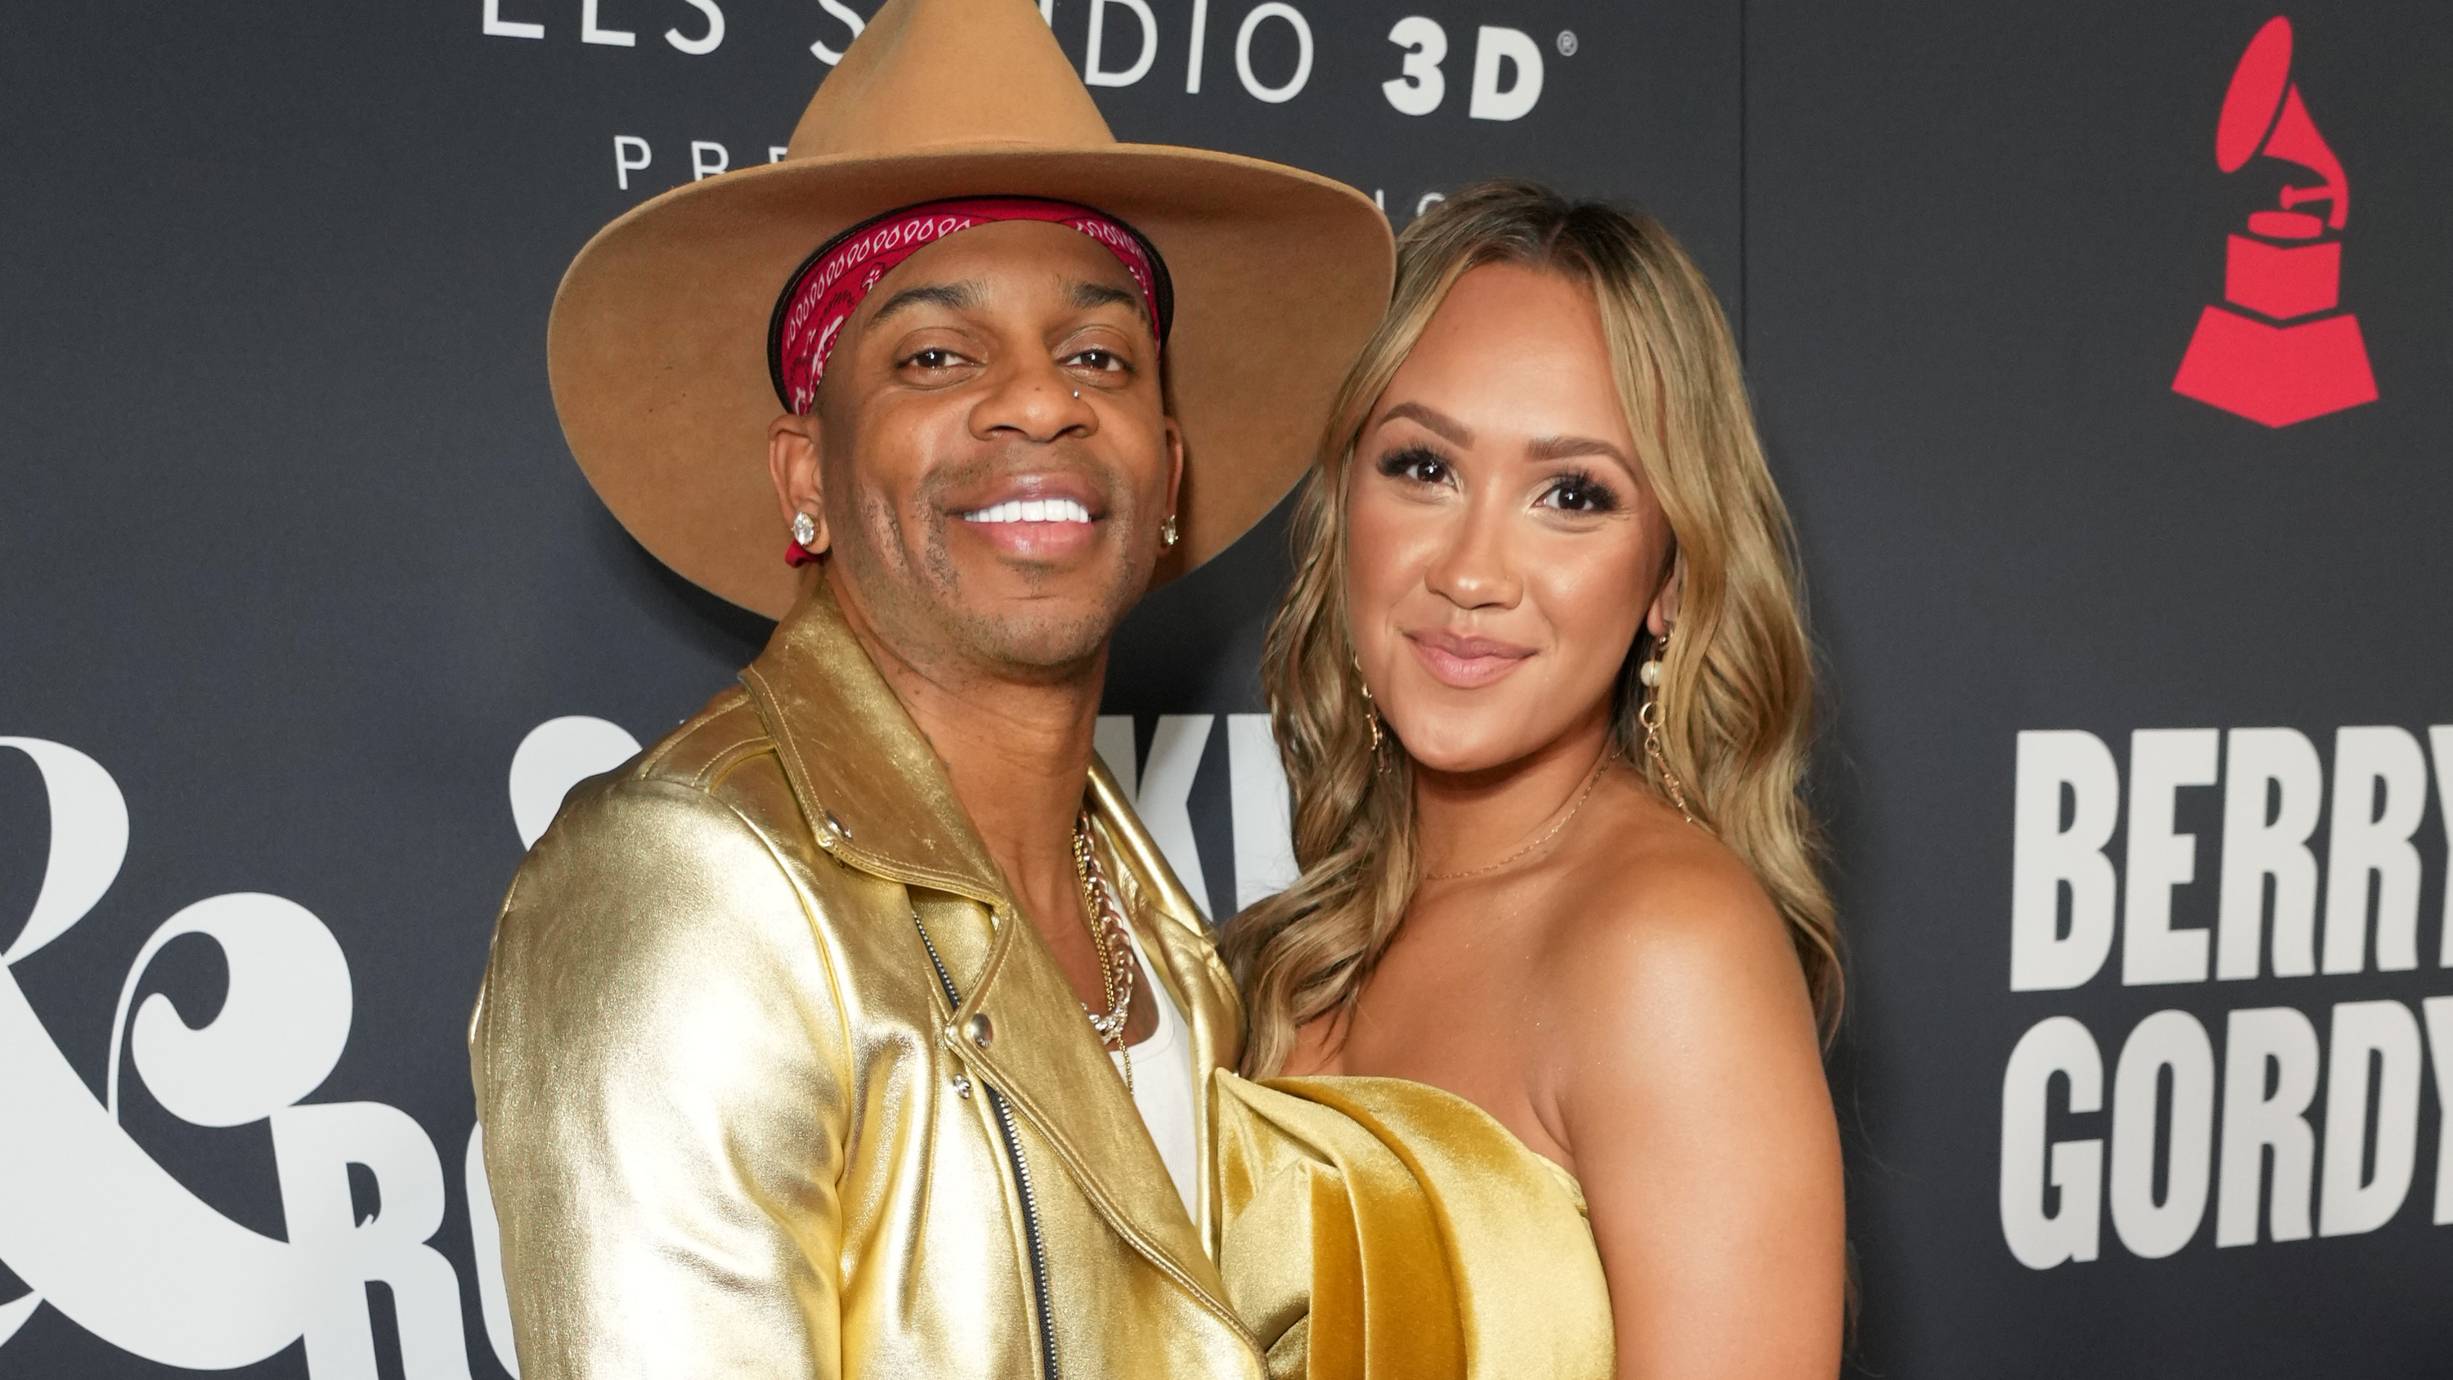 Jimmie Allen and Alexis Gale attend MusiCares Persons of the Year Honoring Berry Gordy and Smokey Robinson at Los Angeles Convention Center on February 03, 2023 in Los Angeles, California. 